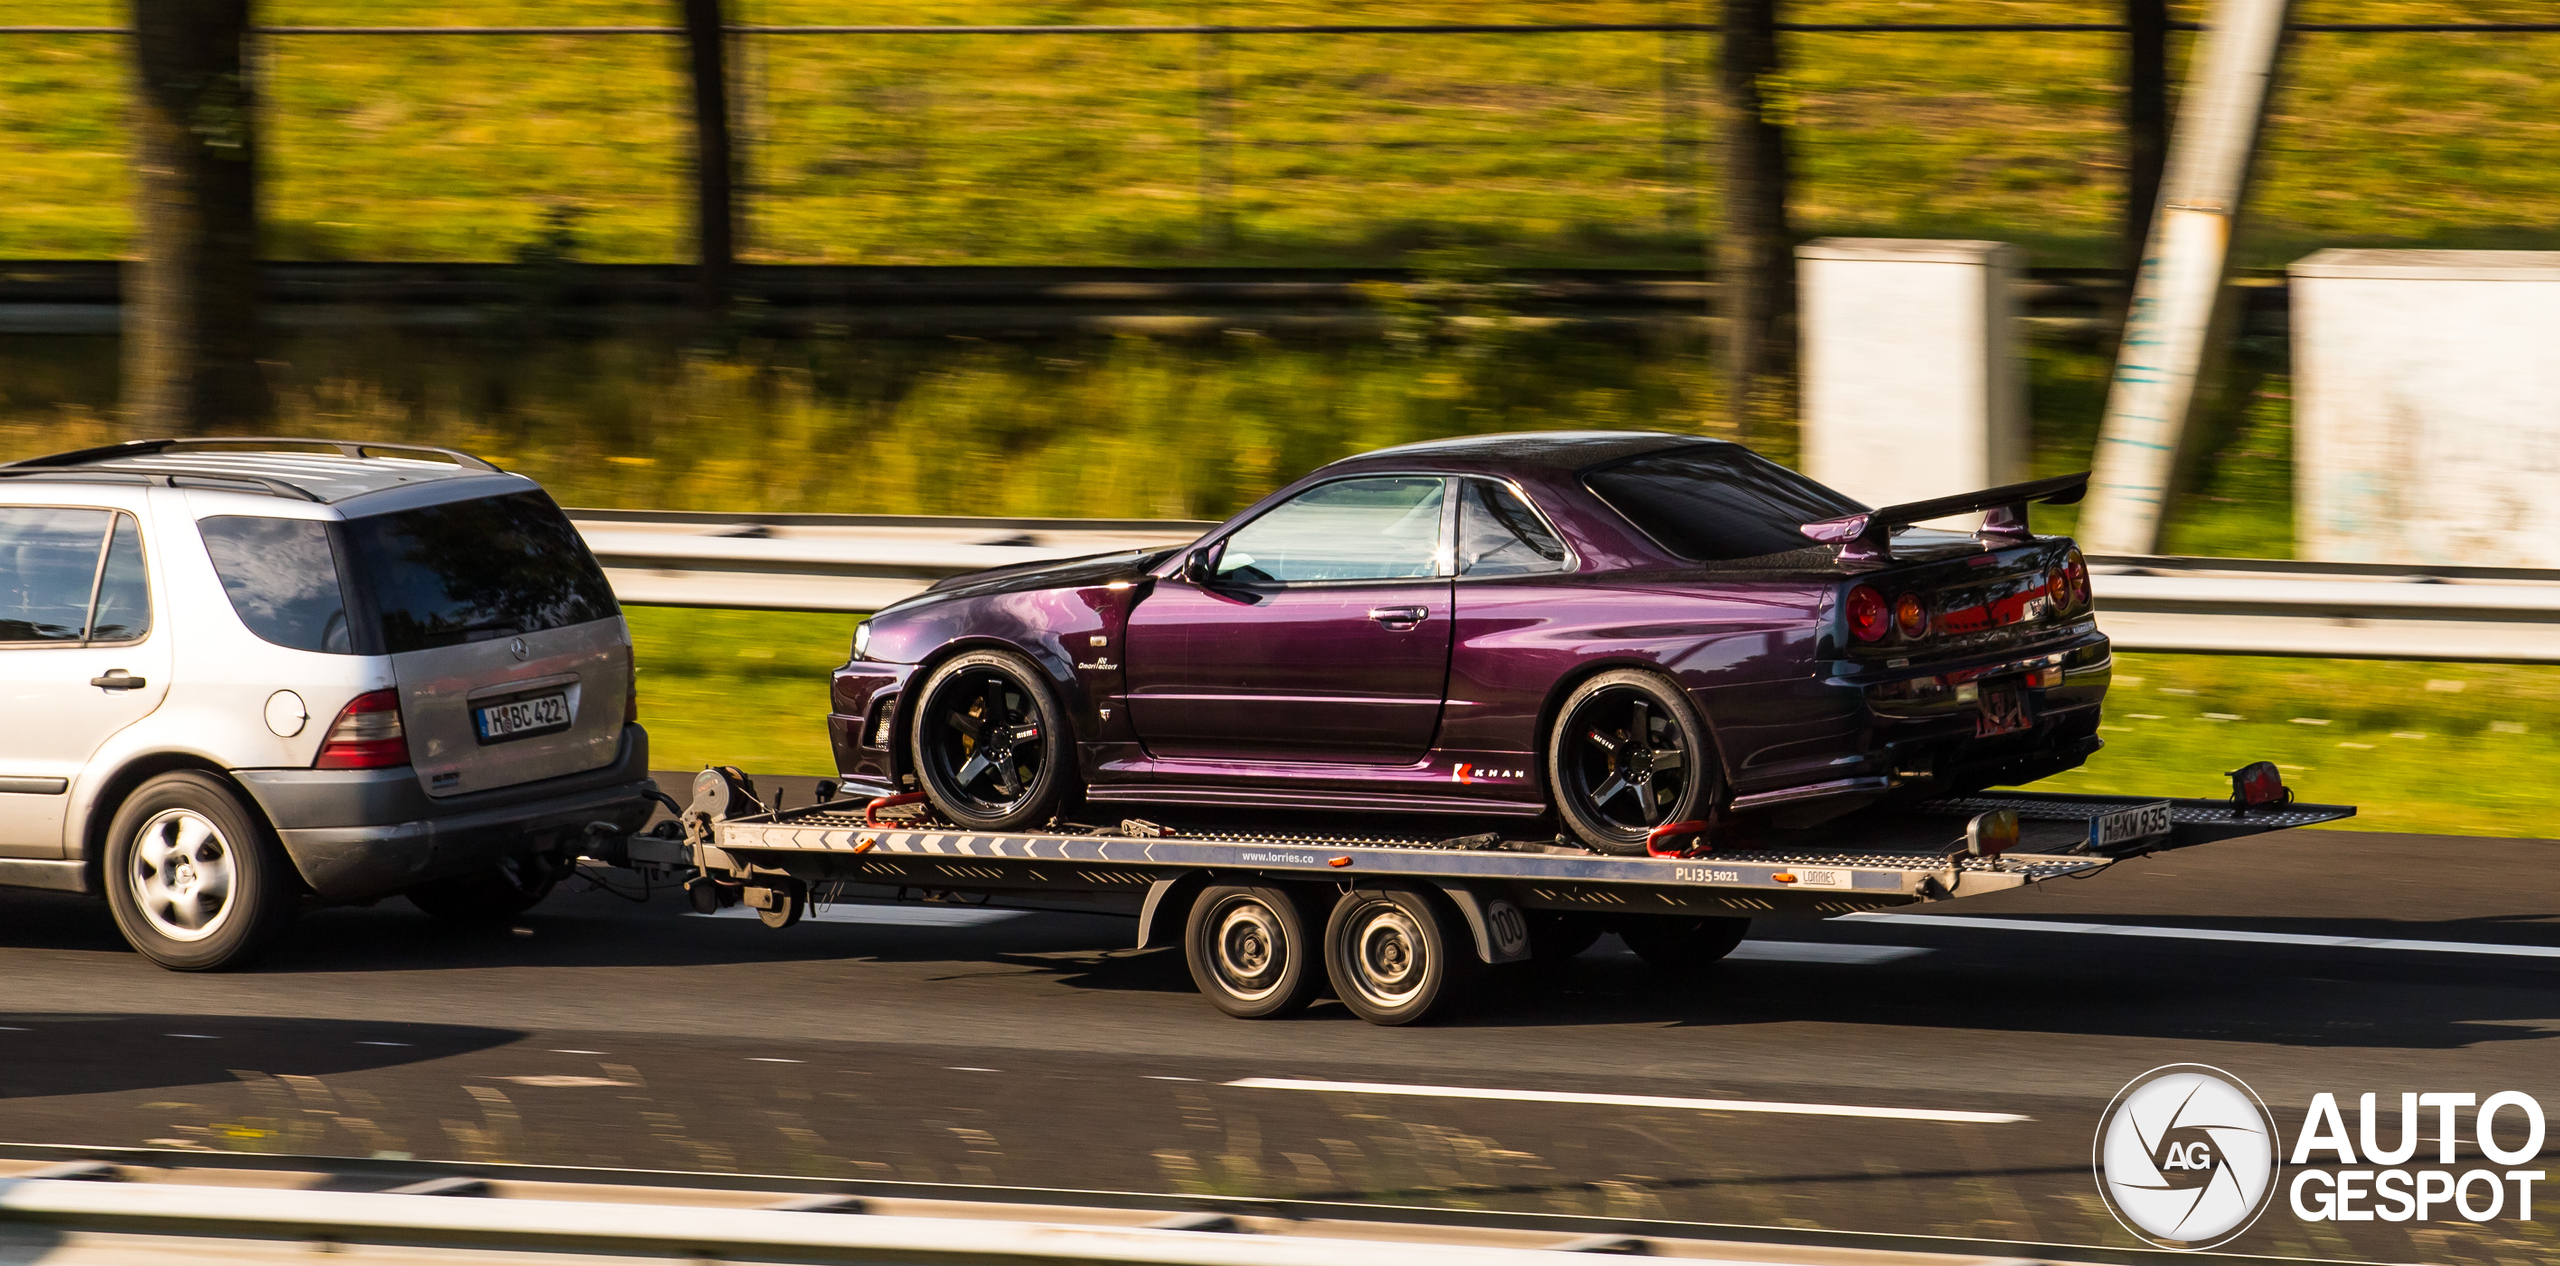 Nissan Skyline R34 GT-R V-Spec Midnight Purple Pearl II Special Color Limited Edition